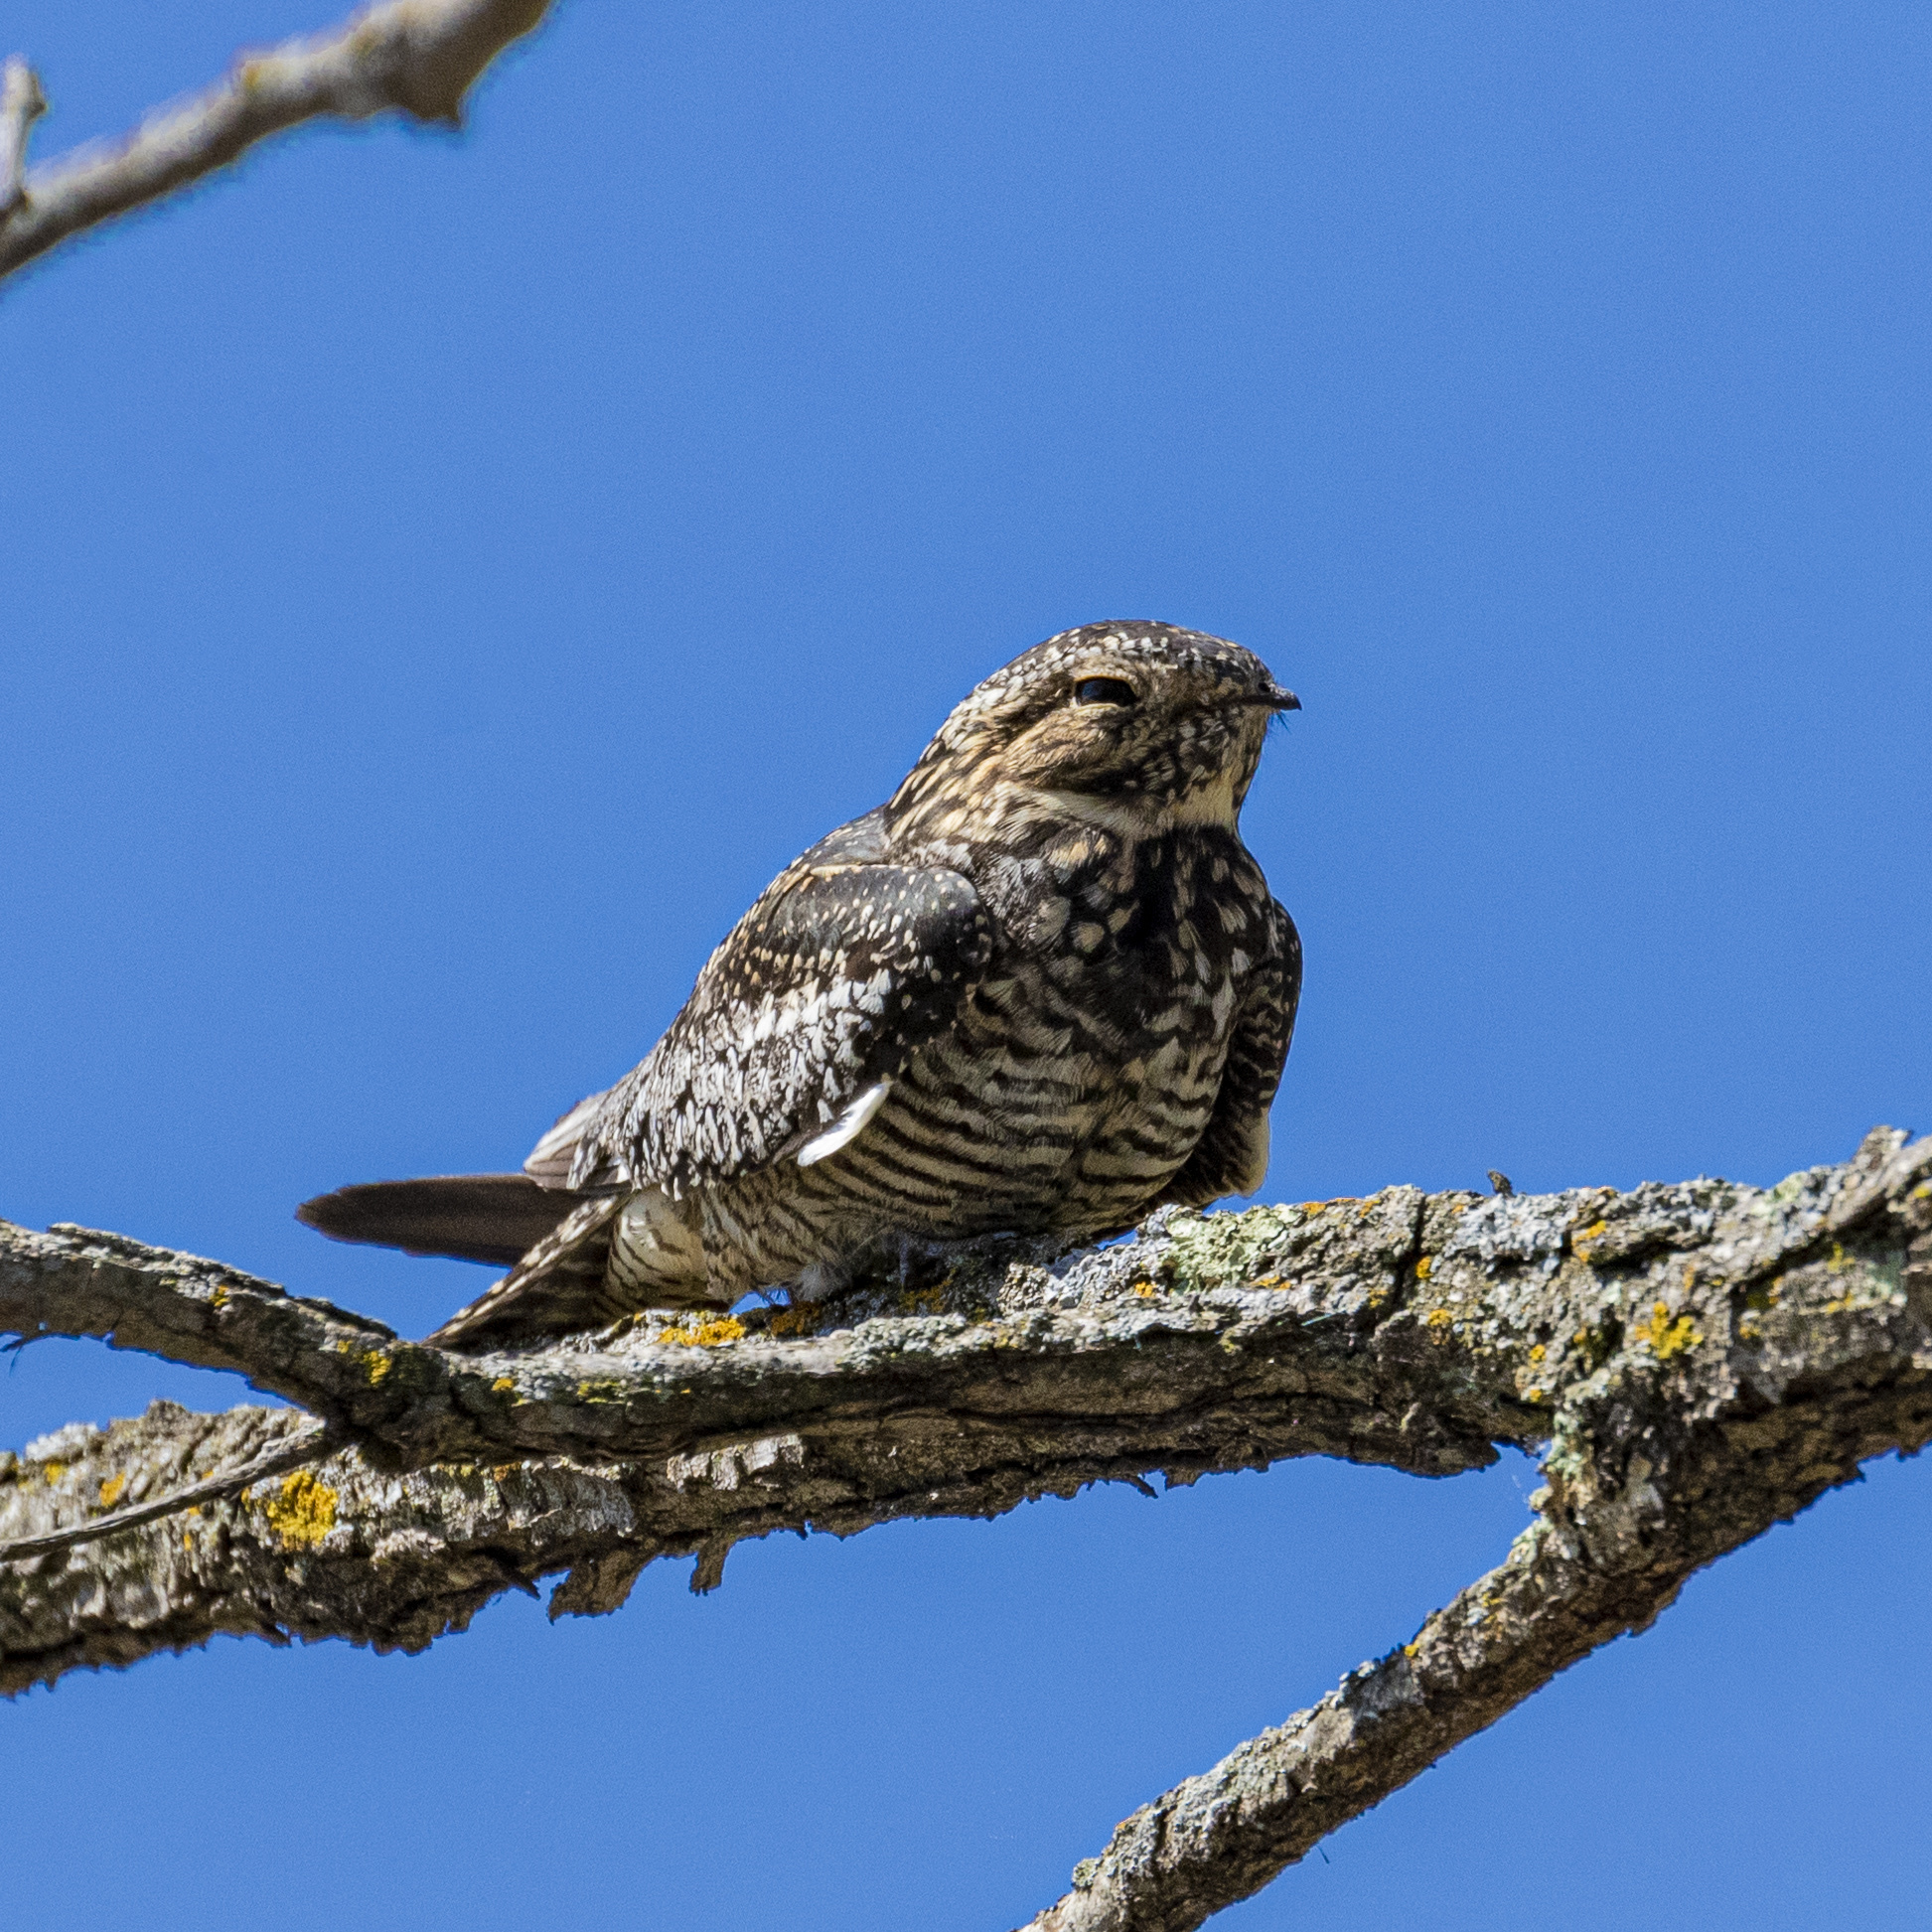 Common nighthawk perched on a branch with bright blue sky background